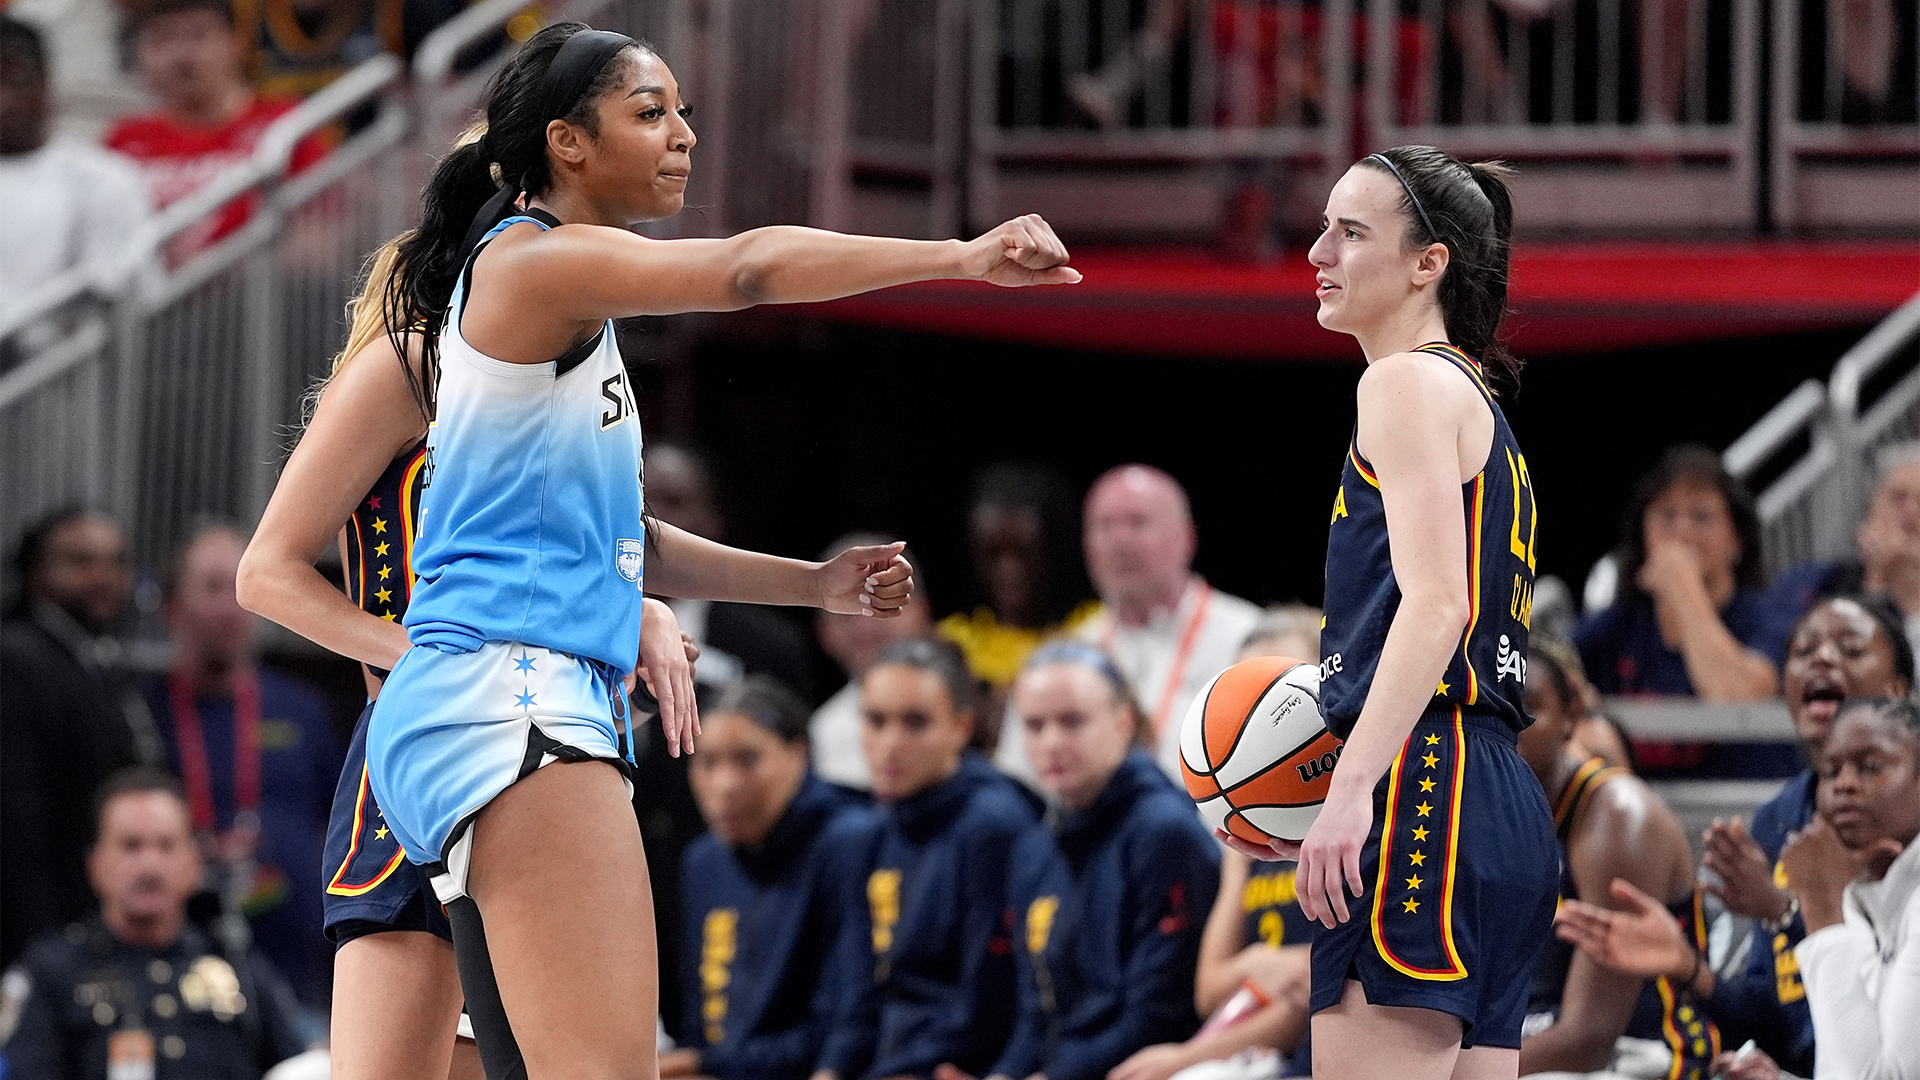 Clark-Reese rivalry could provide continued boost for WNBA’s popularity